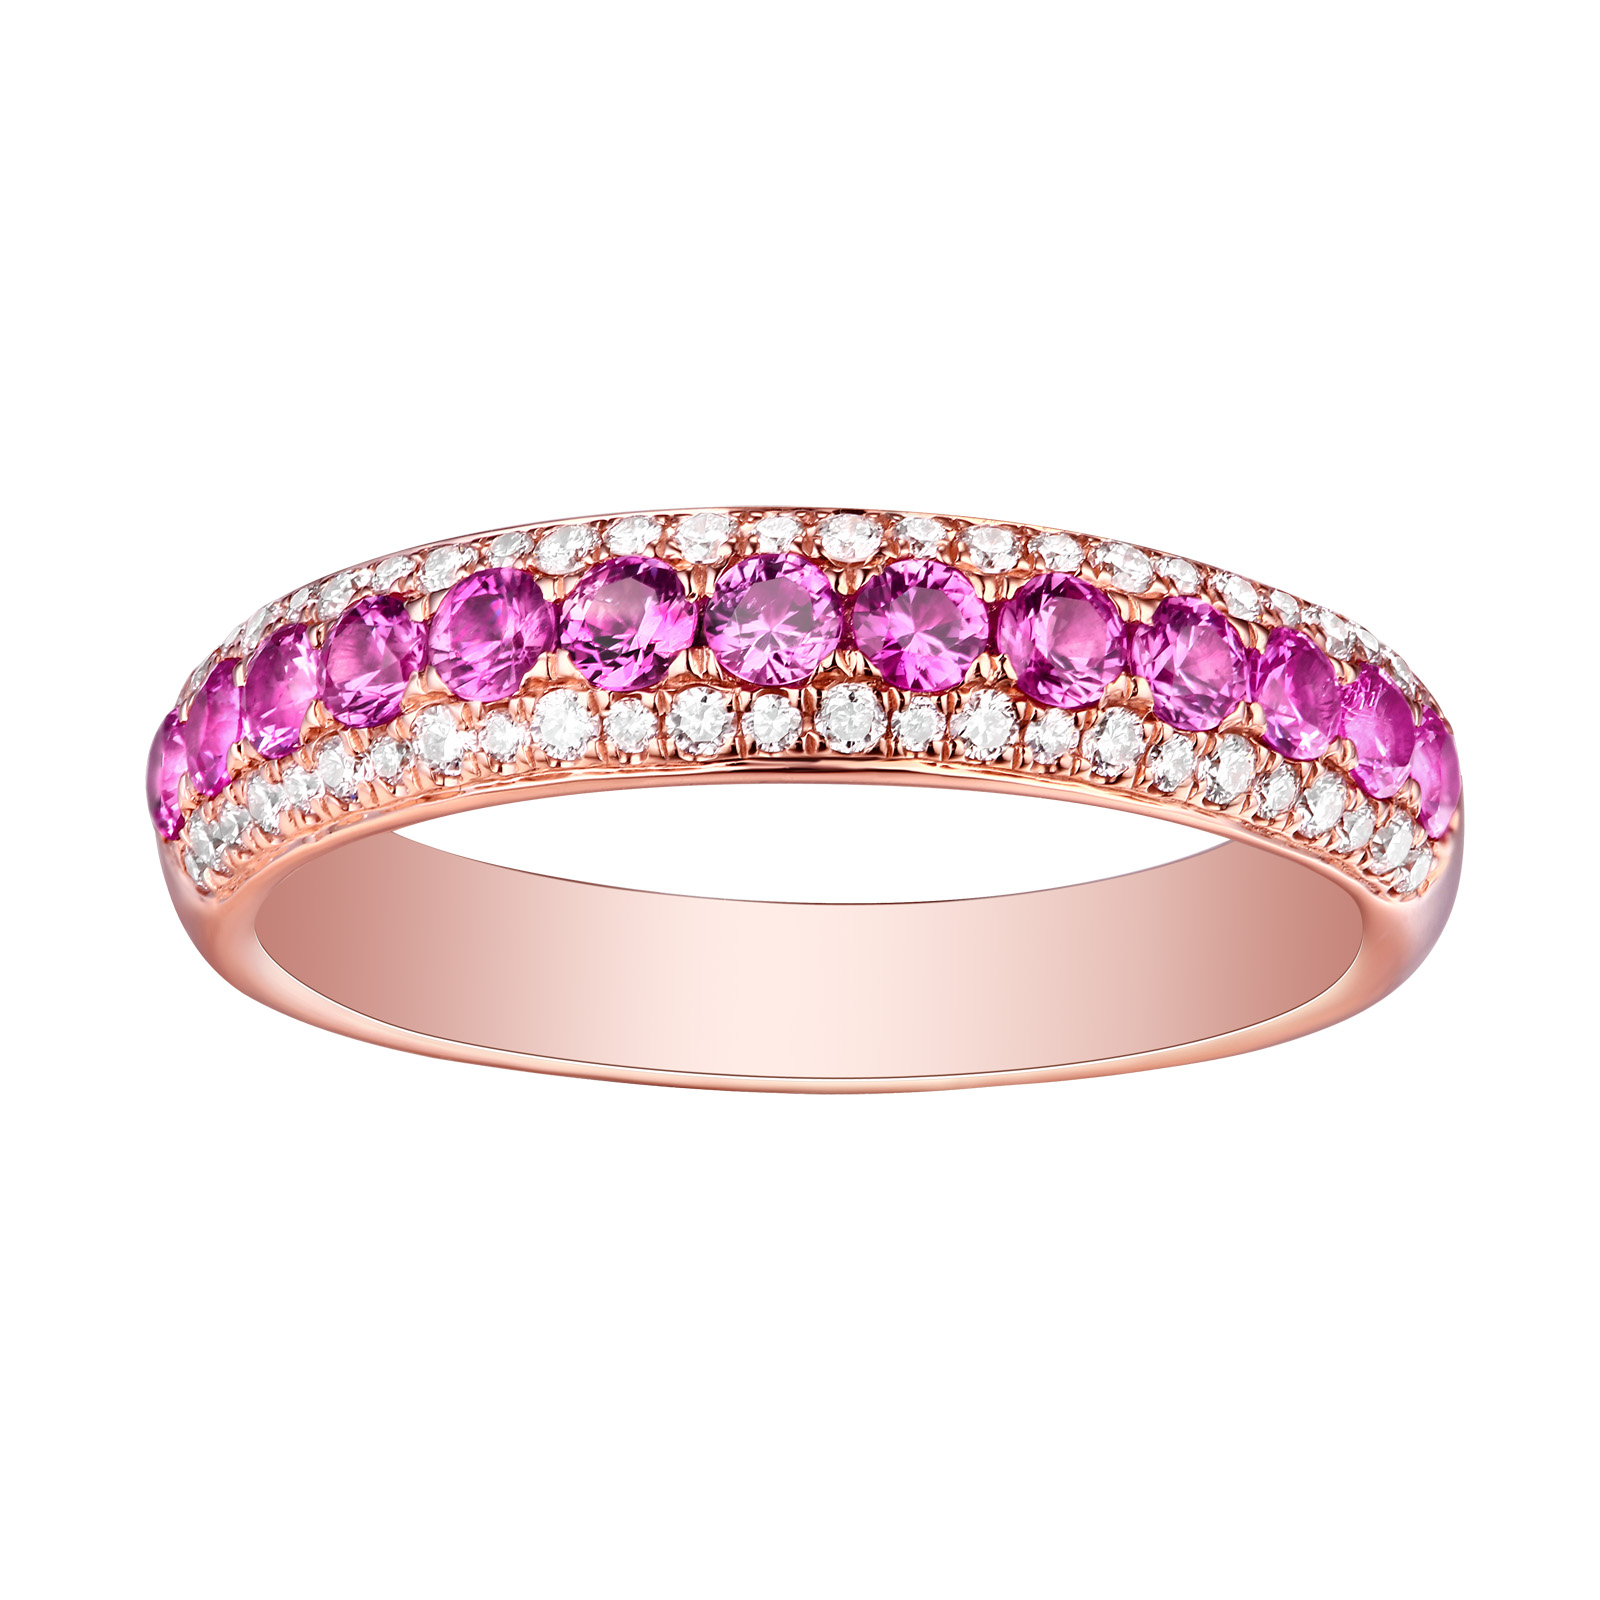 R22820PSA- 14K Rose Gold Pink Sapphire and Diamond Ring, 0.96 TCW